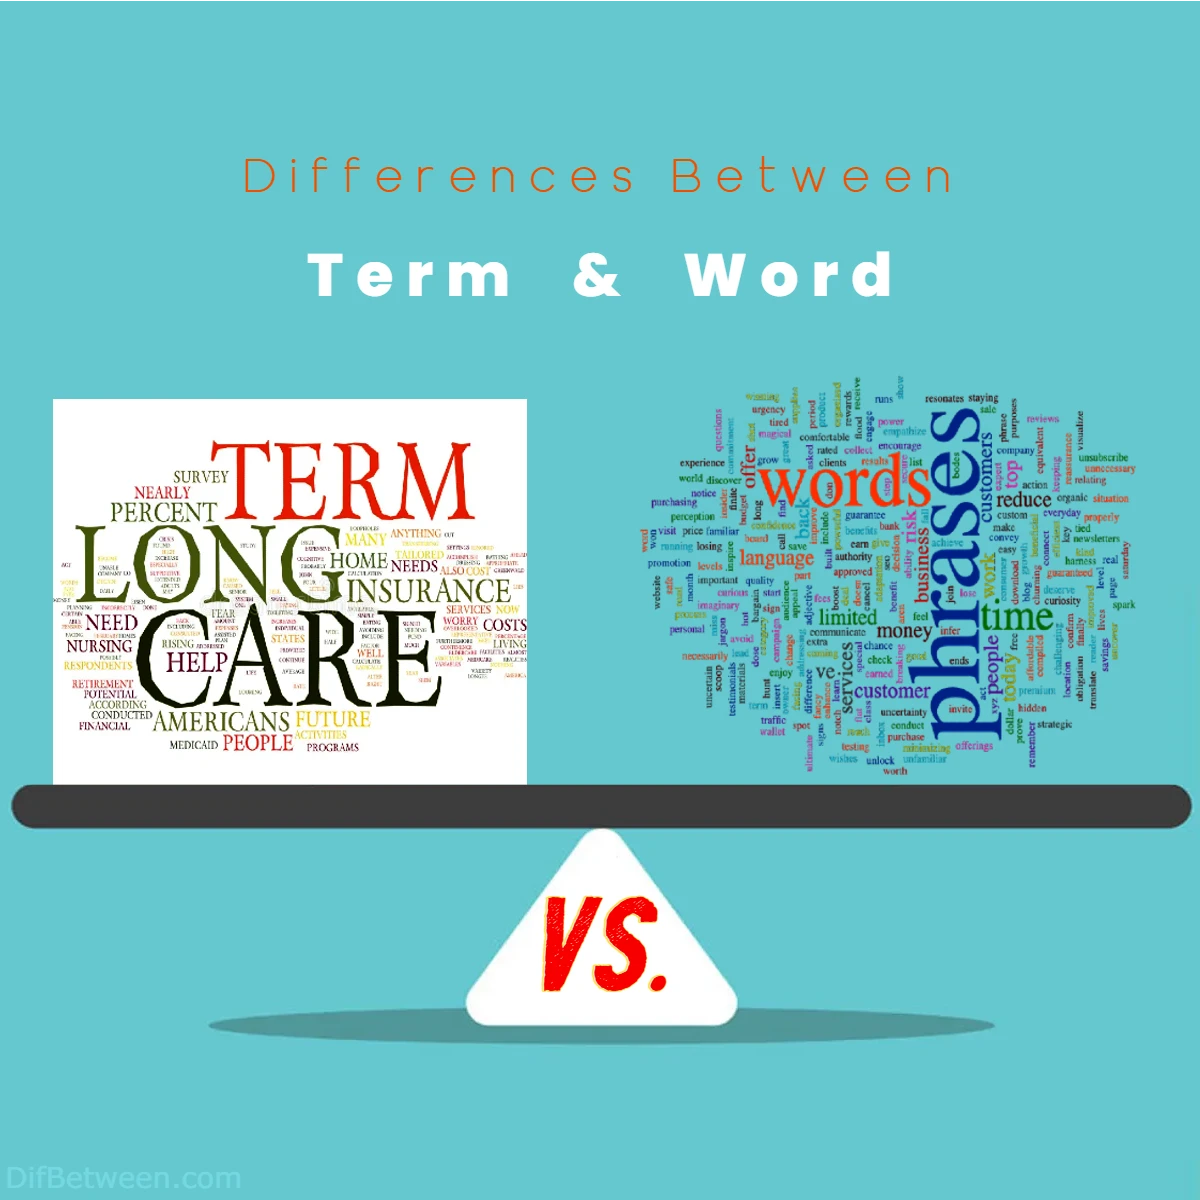 Differences Between Term vs Word